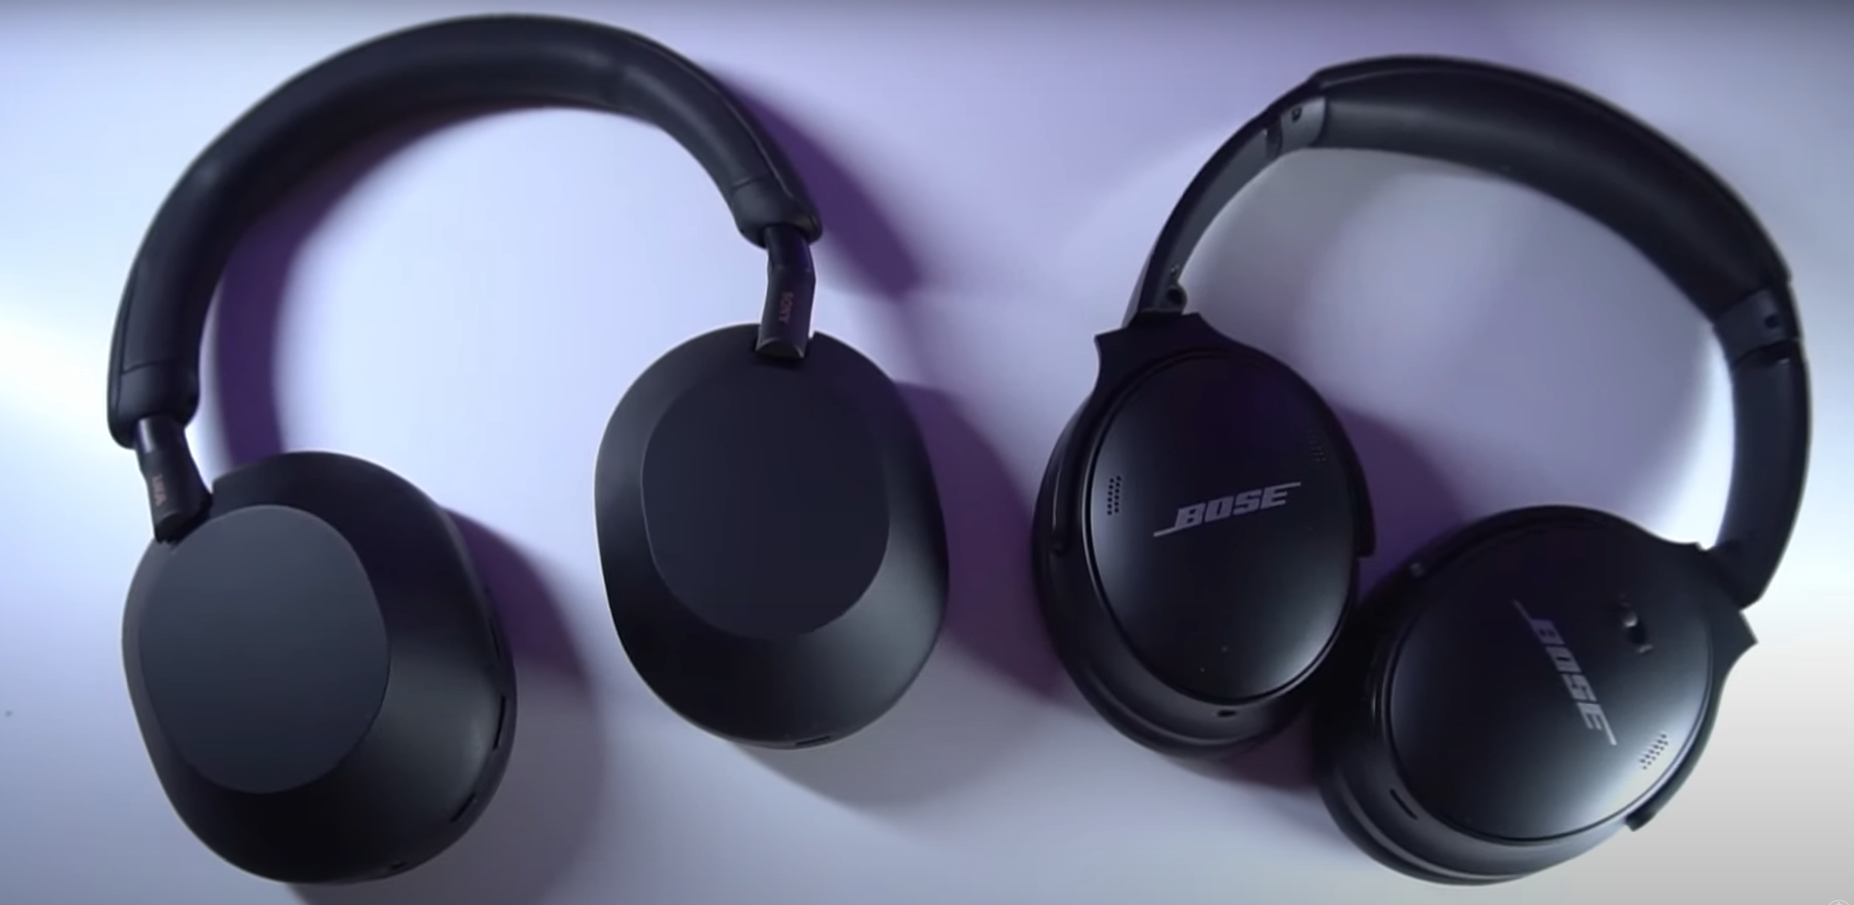 Sony bose. Bose qc45. Bose qc45 Limited. Bose QC 45 Limited Gray. Sony Noise Cancelling whch720nl.